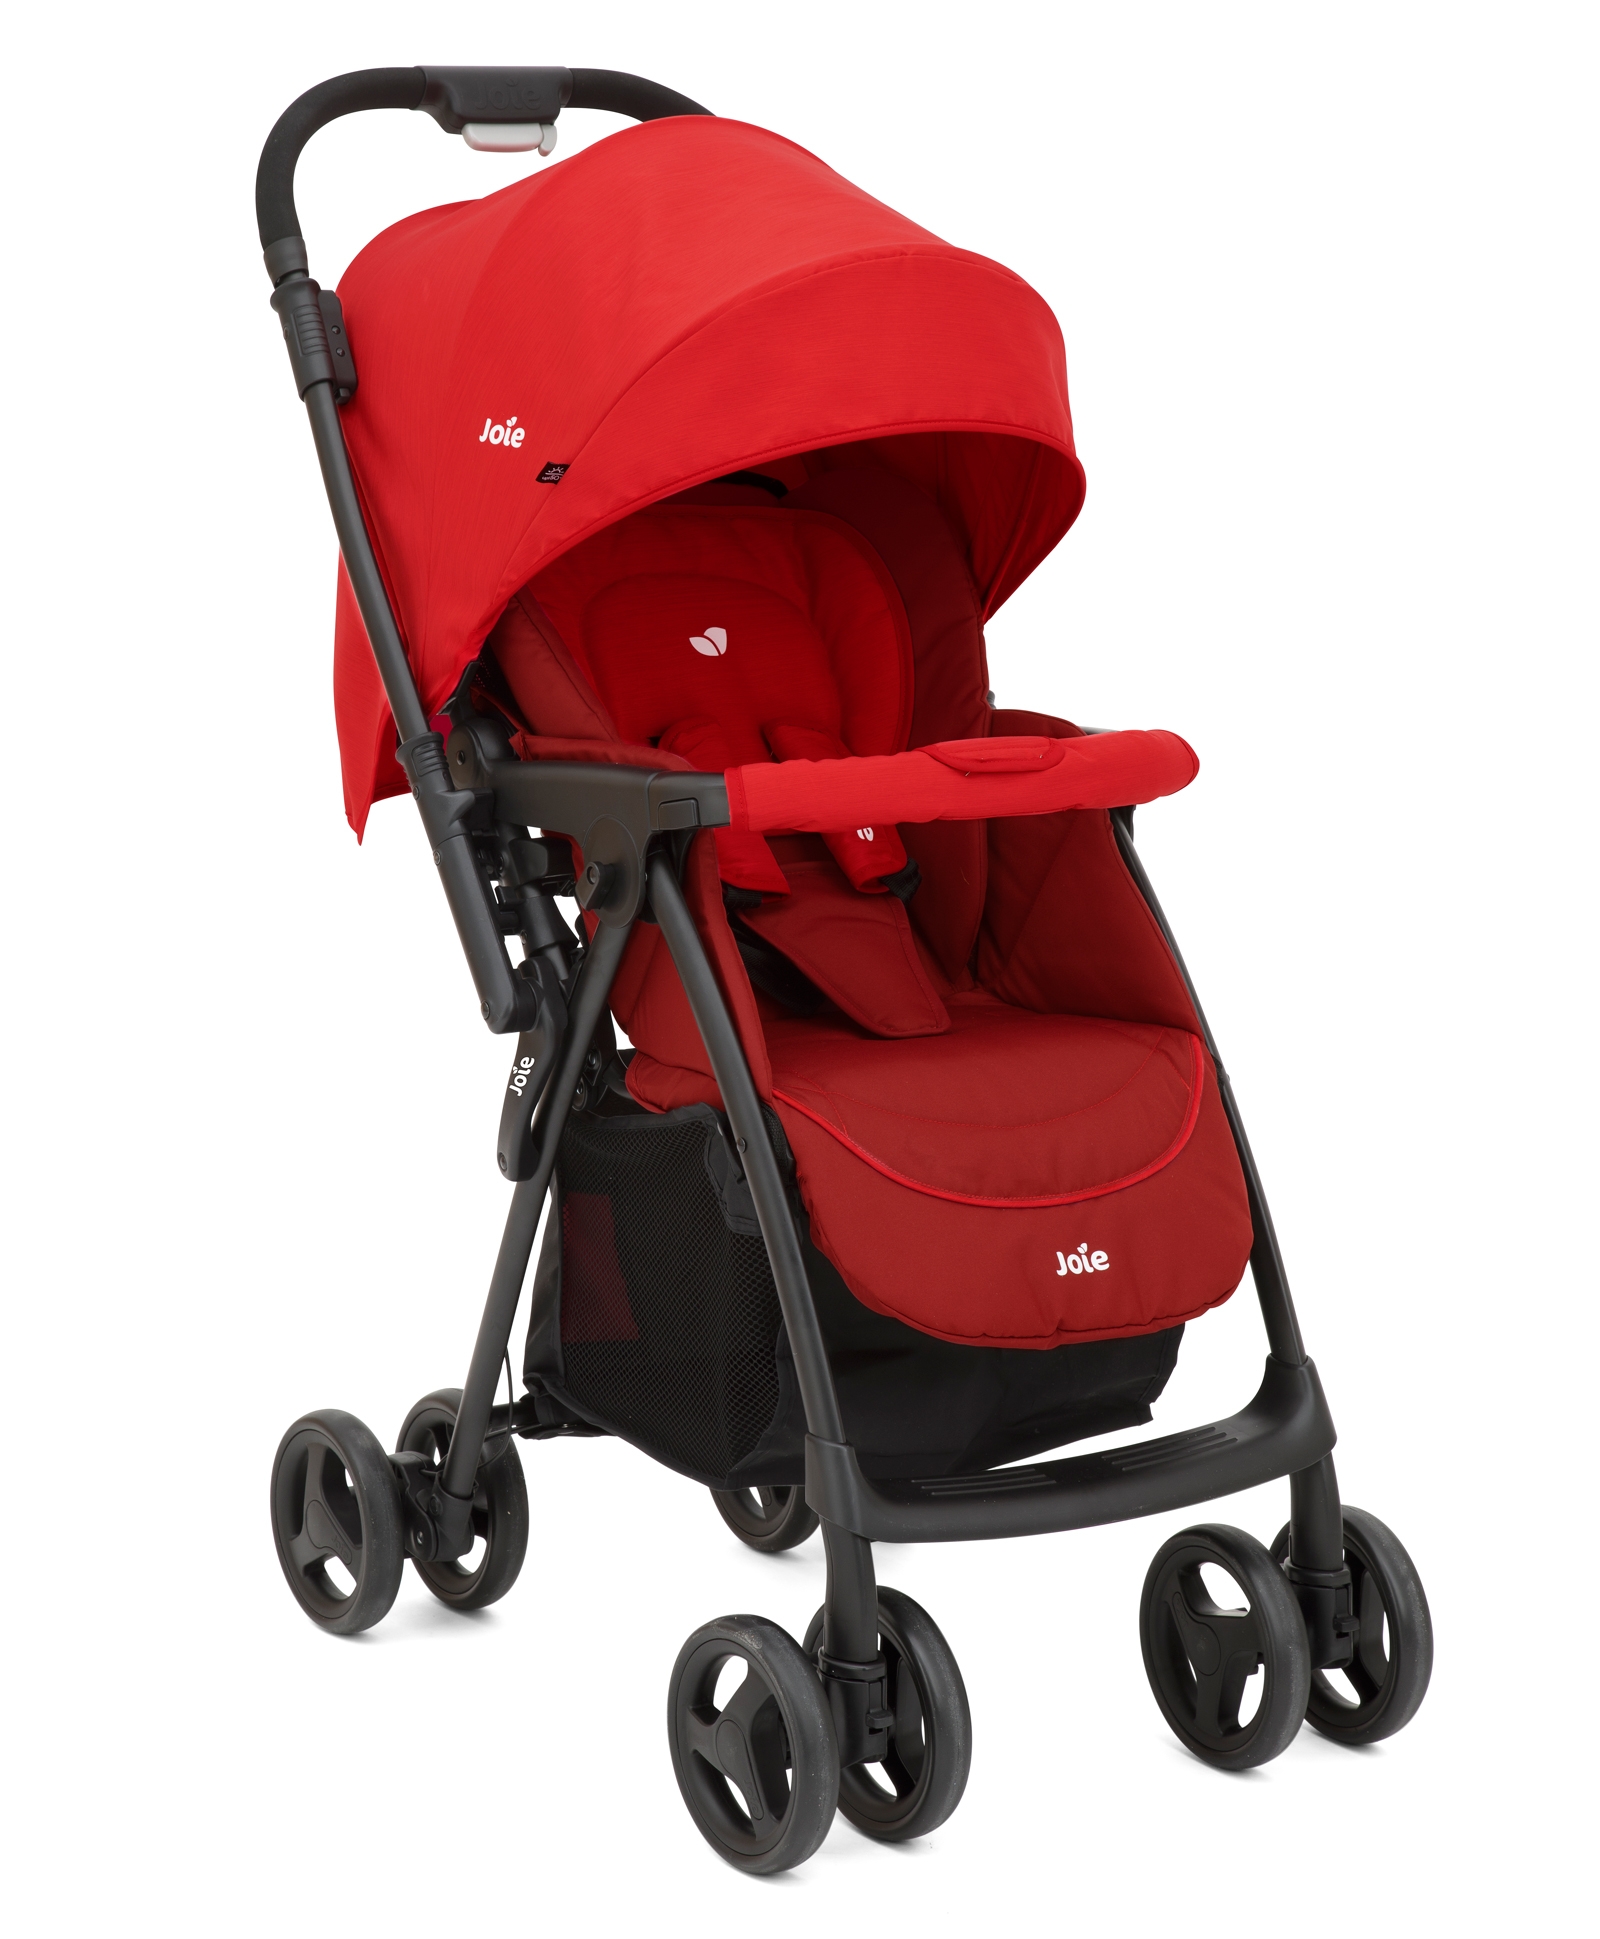 joie stroller made in